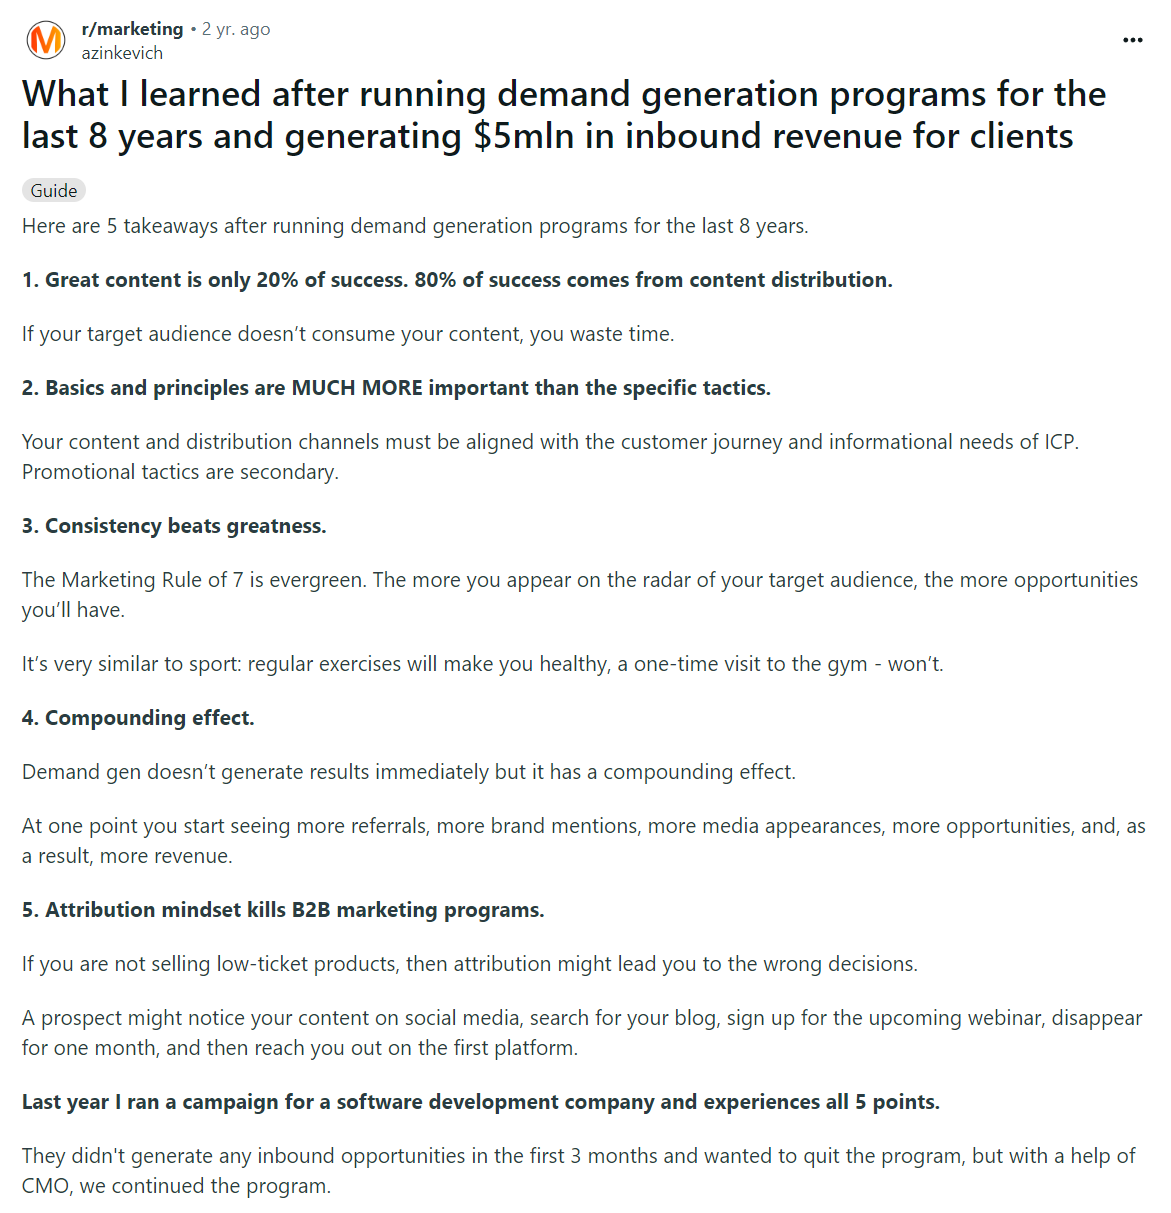 A Demand Gen expert creates a Reddit post explaining what he's learned over 8 years in the space and how he's used it to drive millions of in bound revenue